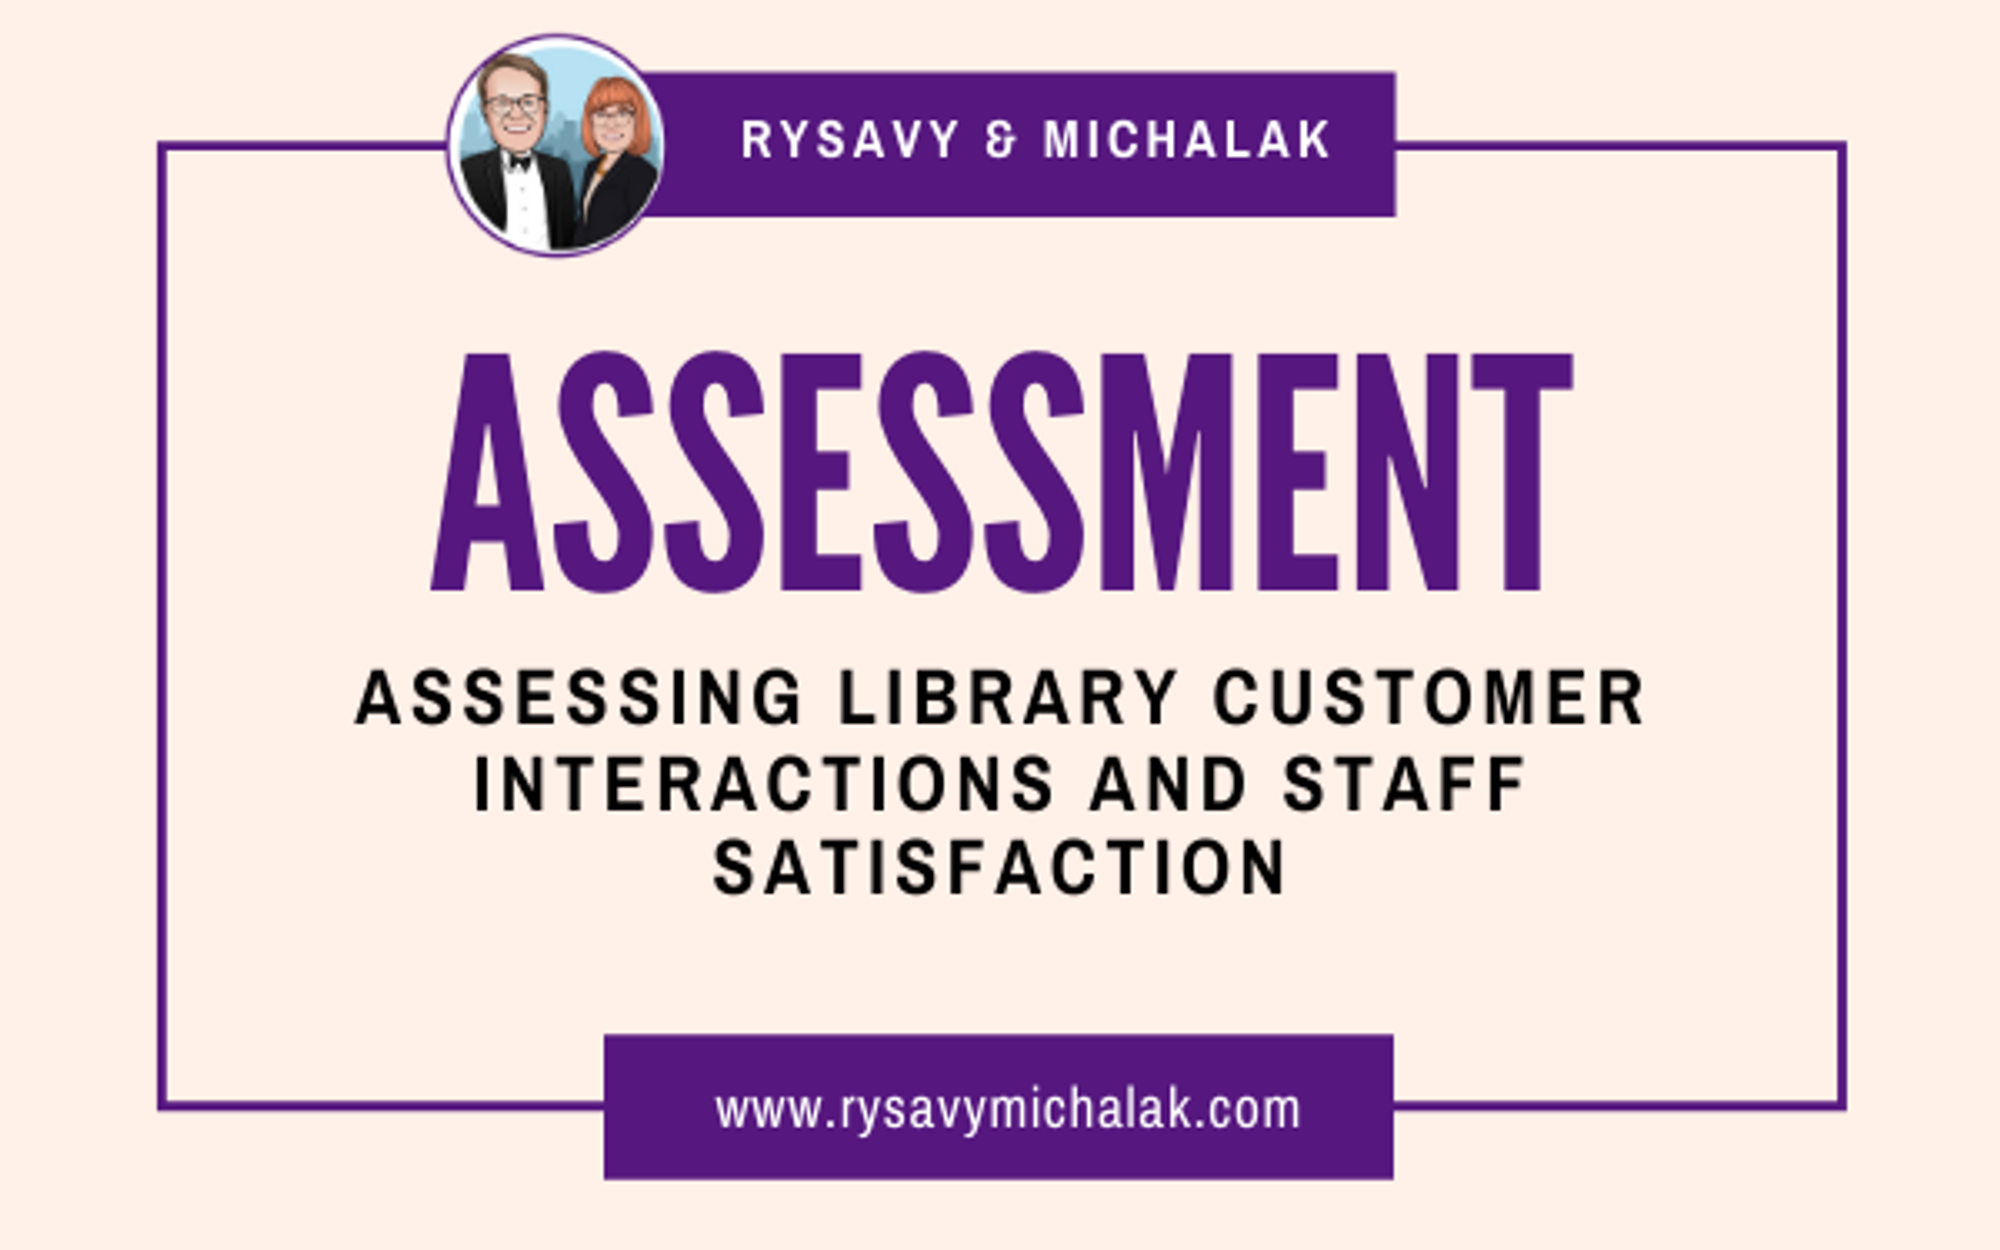 Assessing Library Customer Interactions and Staff Satisfaction